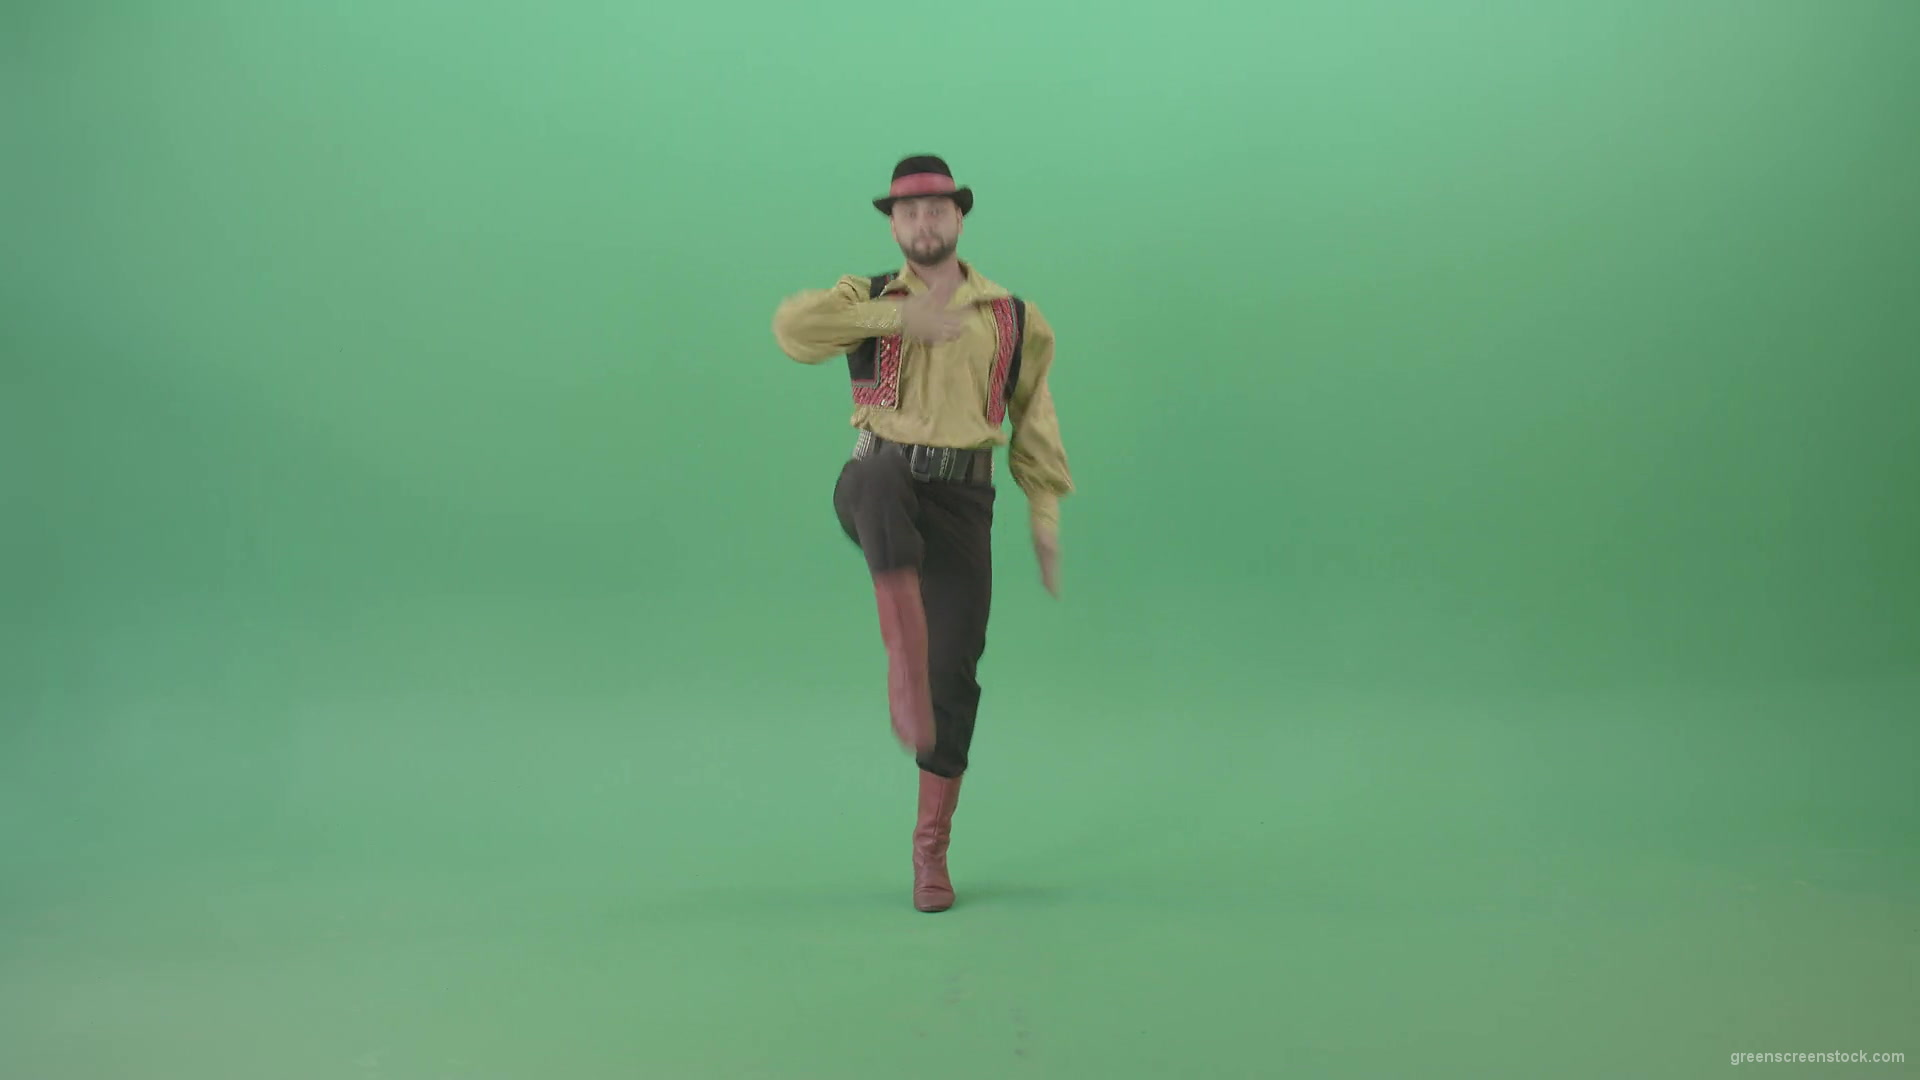 Funny-dancing-Gipsy-in-Moldova-jumping-isolated-on-Green-Screen-4K-Video-Footage-1920_006 Green Screen Stock